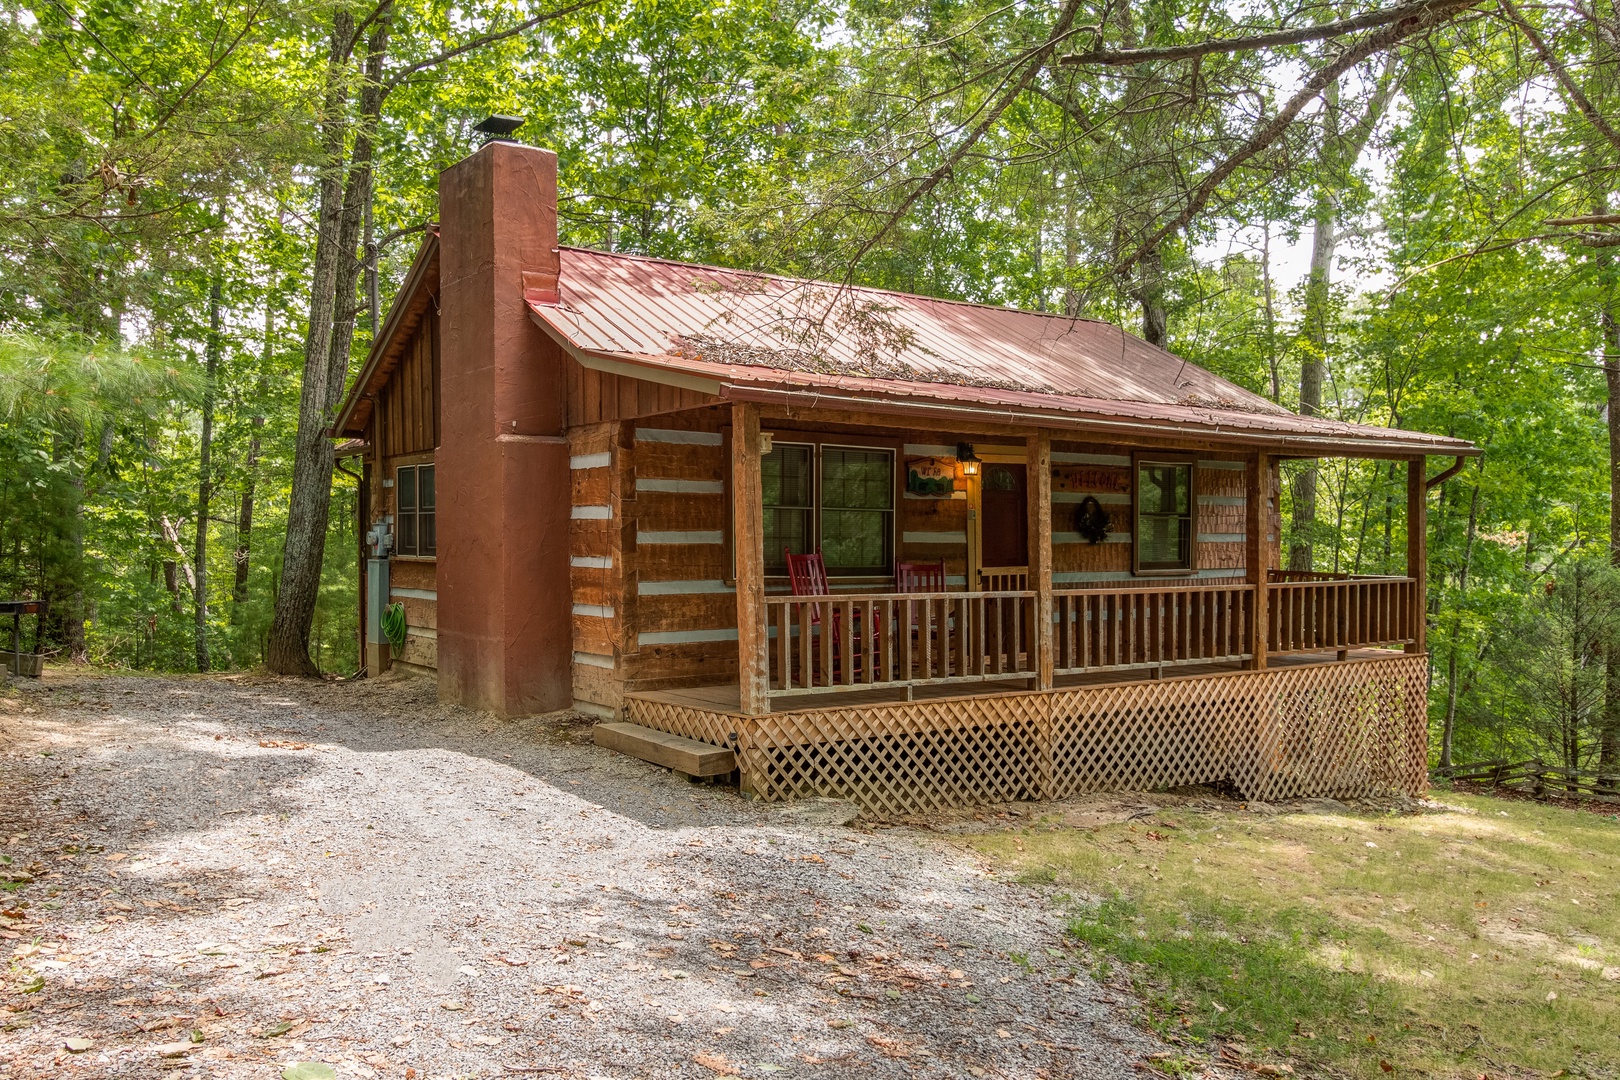 Driveway and cabin at Little Bear, a 1 bedroom cabin rental located in Pigeon Forge